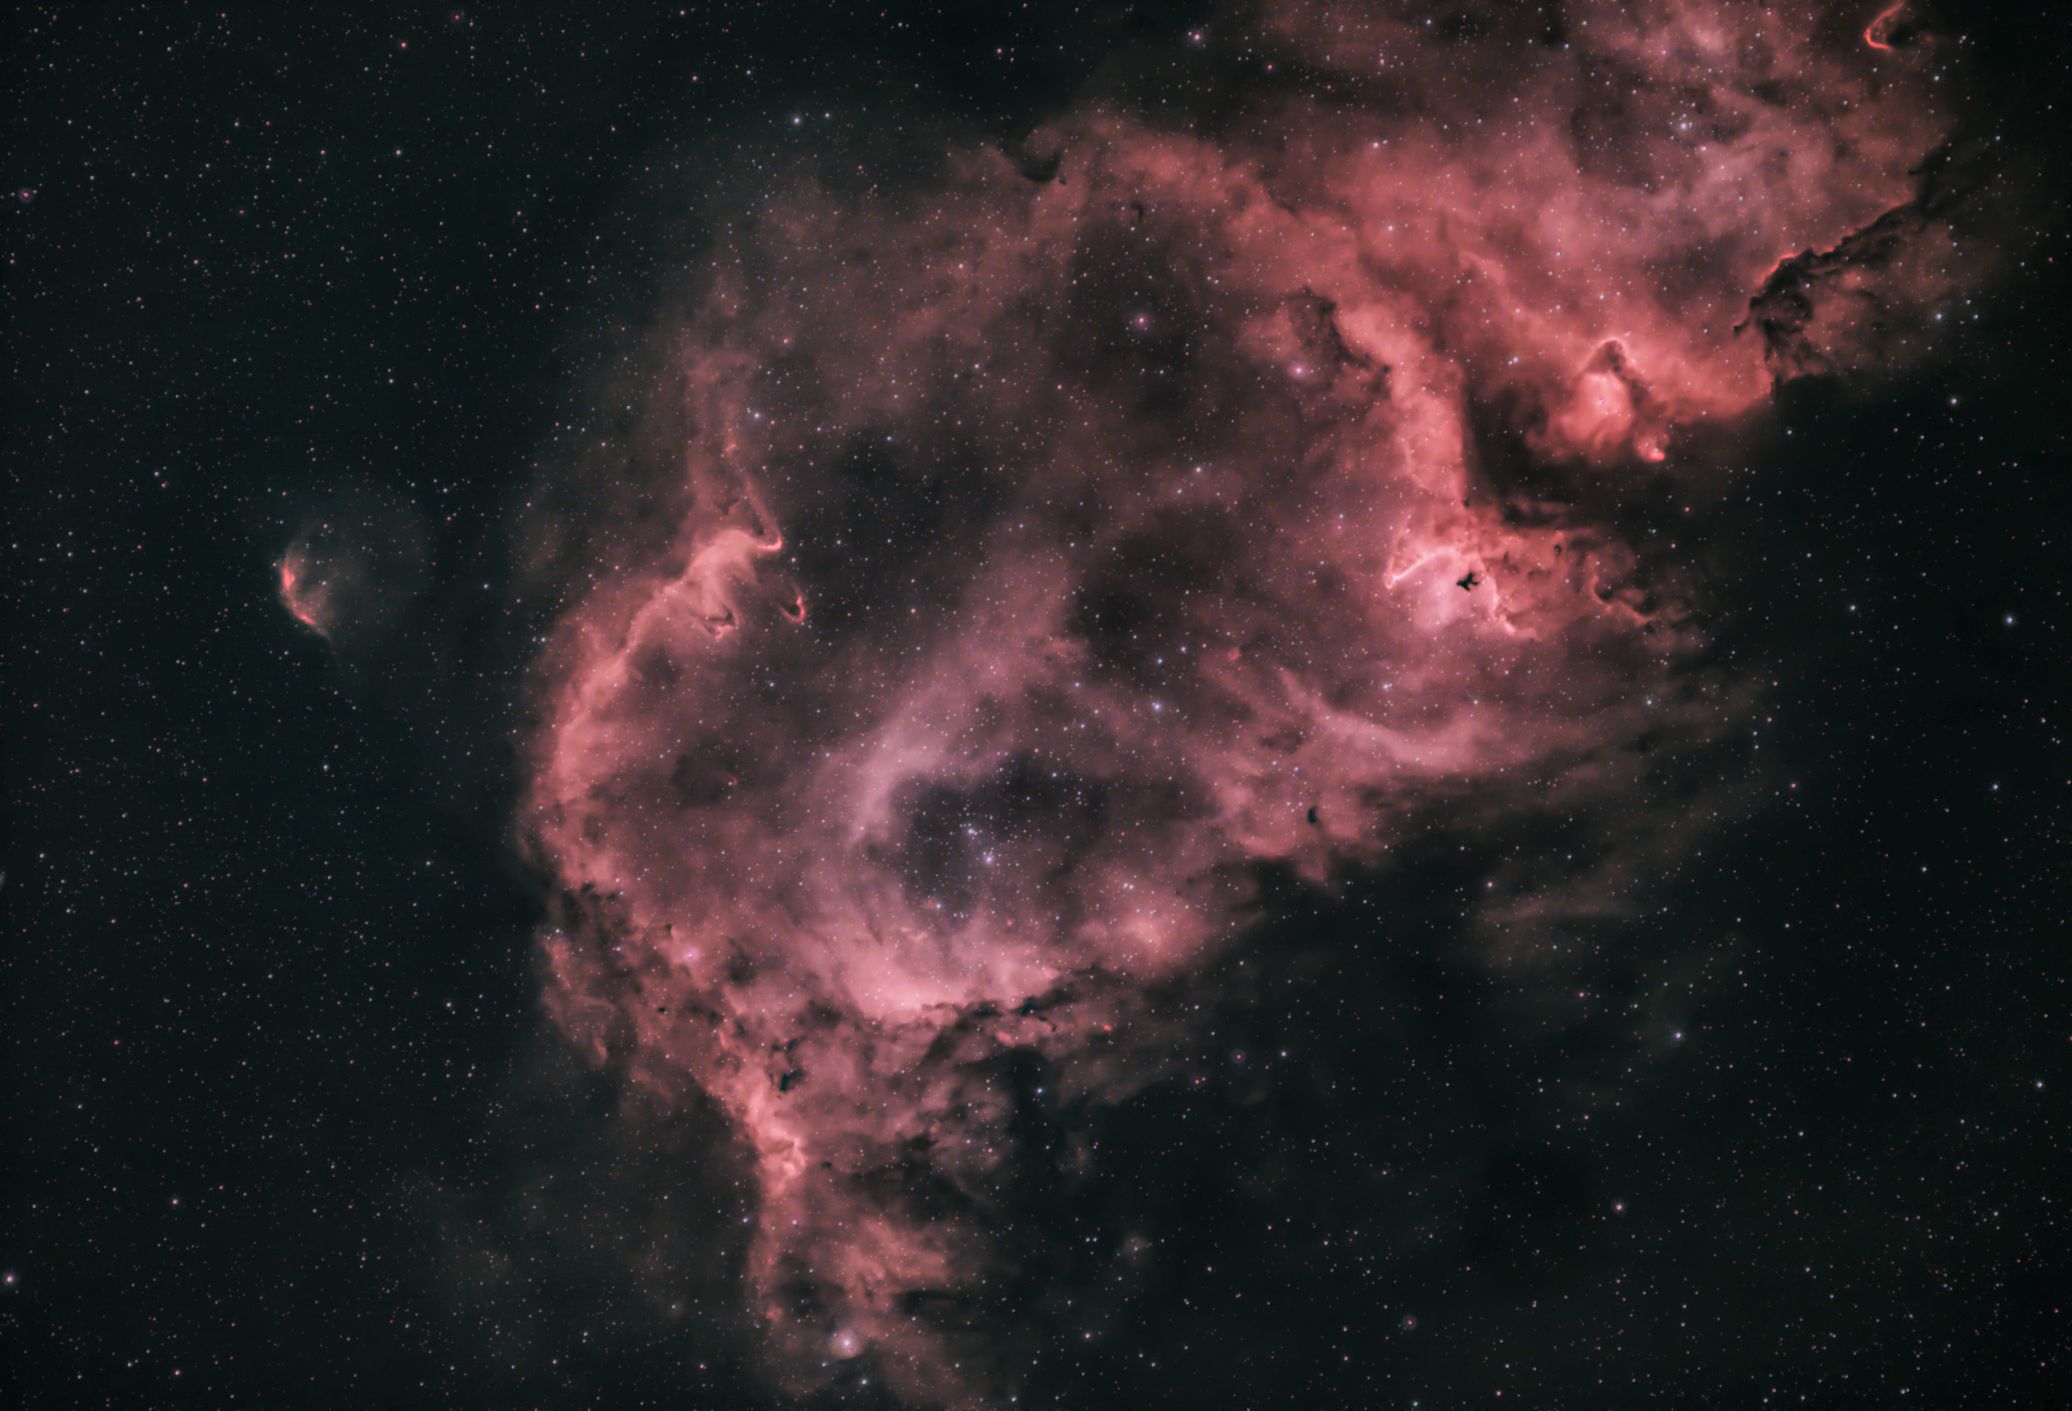 Phil Rourke. IC1848 the Soul Nebula is located in the constellation of Cassiopeia. 26:12:2022.  SkyWatcher ED80 refractor and focal reducer, SkyWatcher HEQ5PRO mount, ZWO ASI294MC PRO colour camera and Optolong Extreme dual narrowband filter.